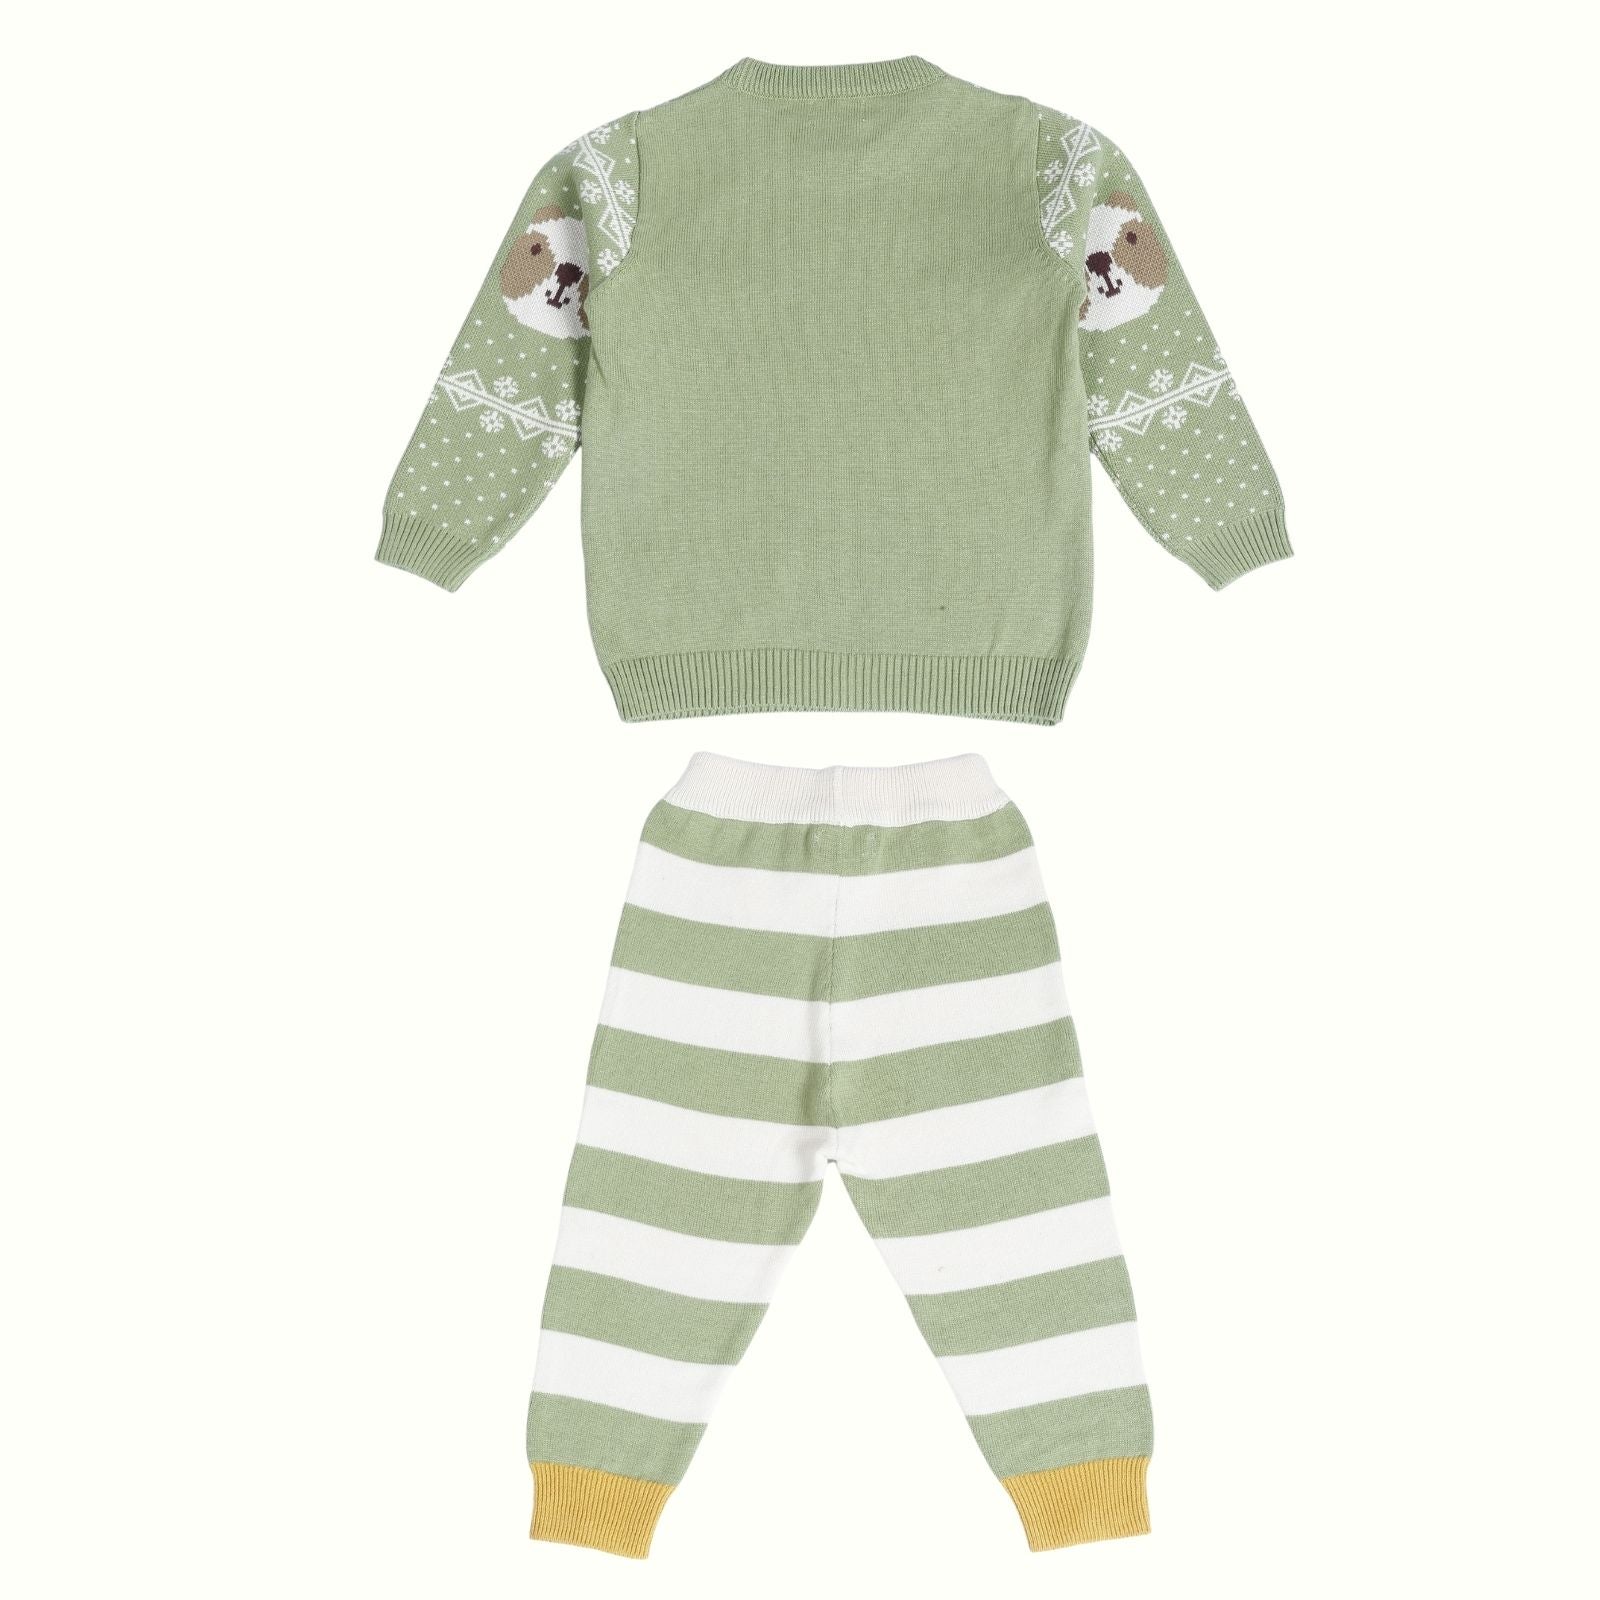 Greendeer Enchanting Bear Jacquard 100% Cotton Sweater with Lower  - Pistachio Green - Set of 2